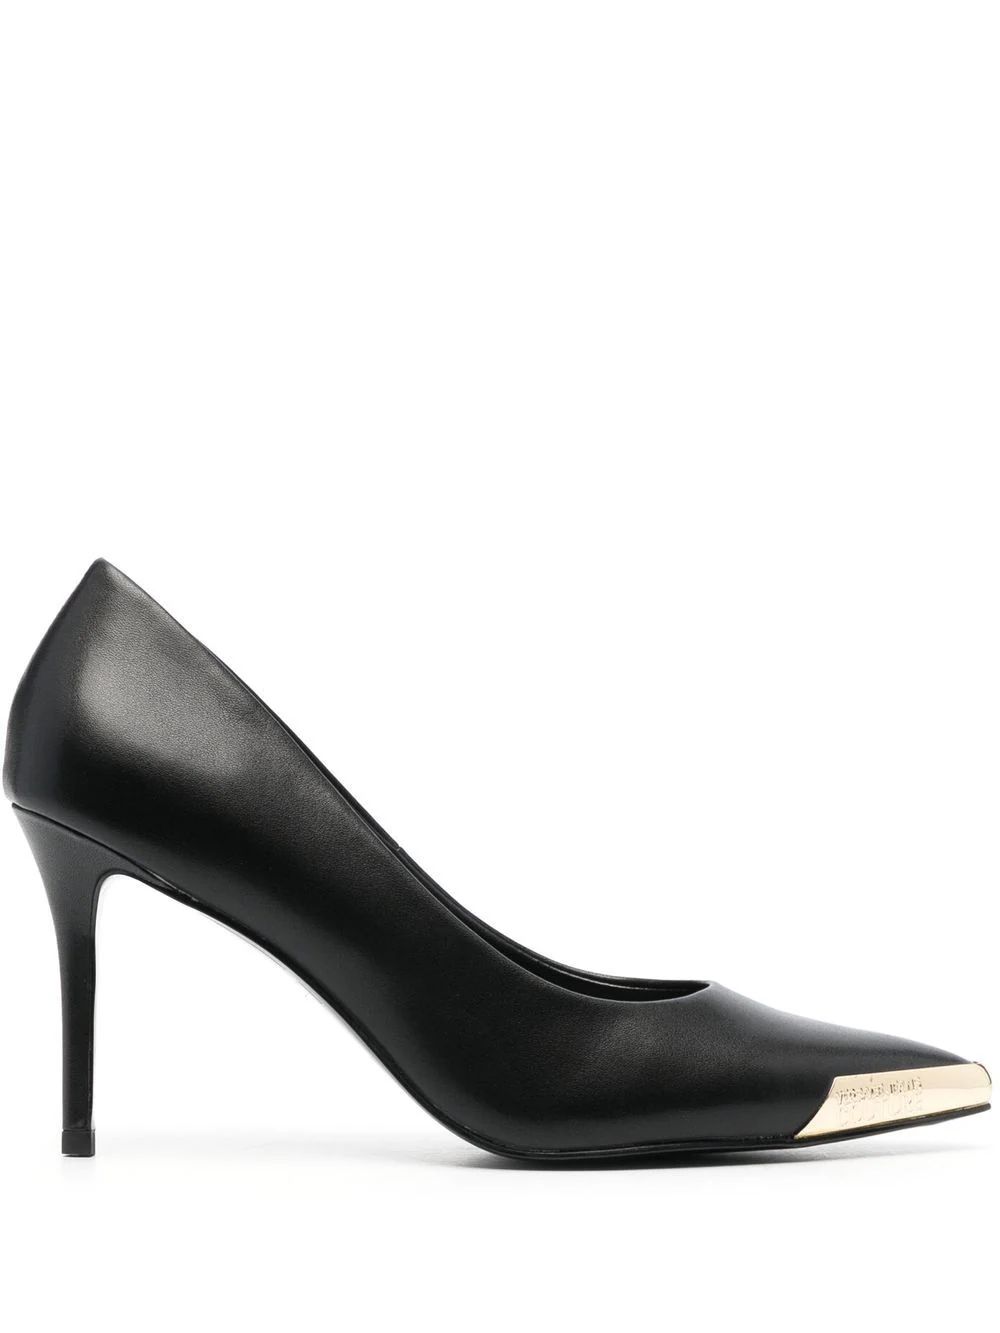 pointed-toe pumps | Farfetch Global